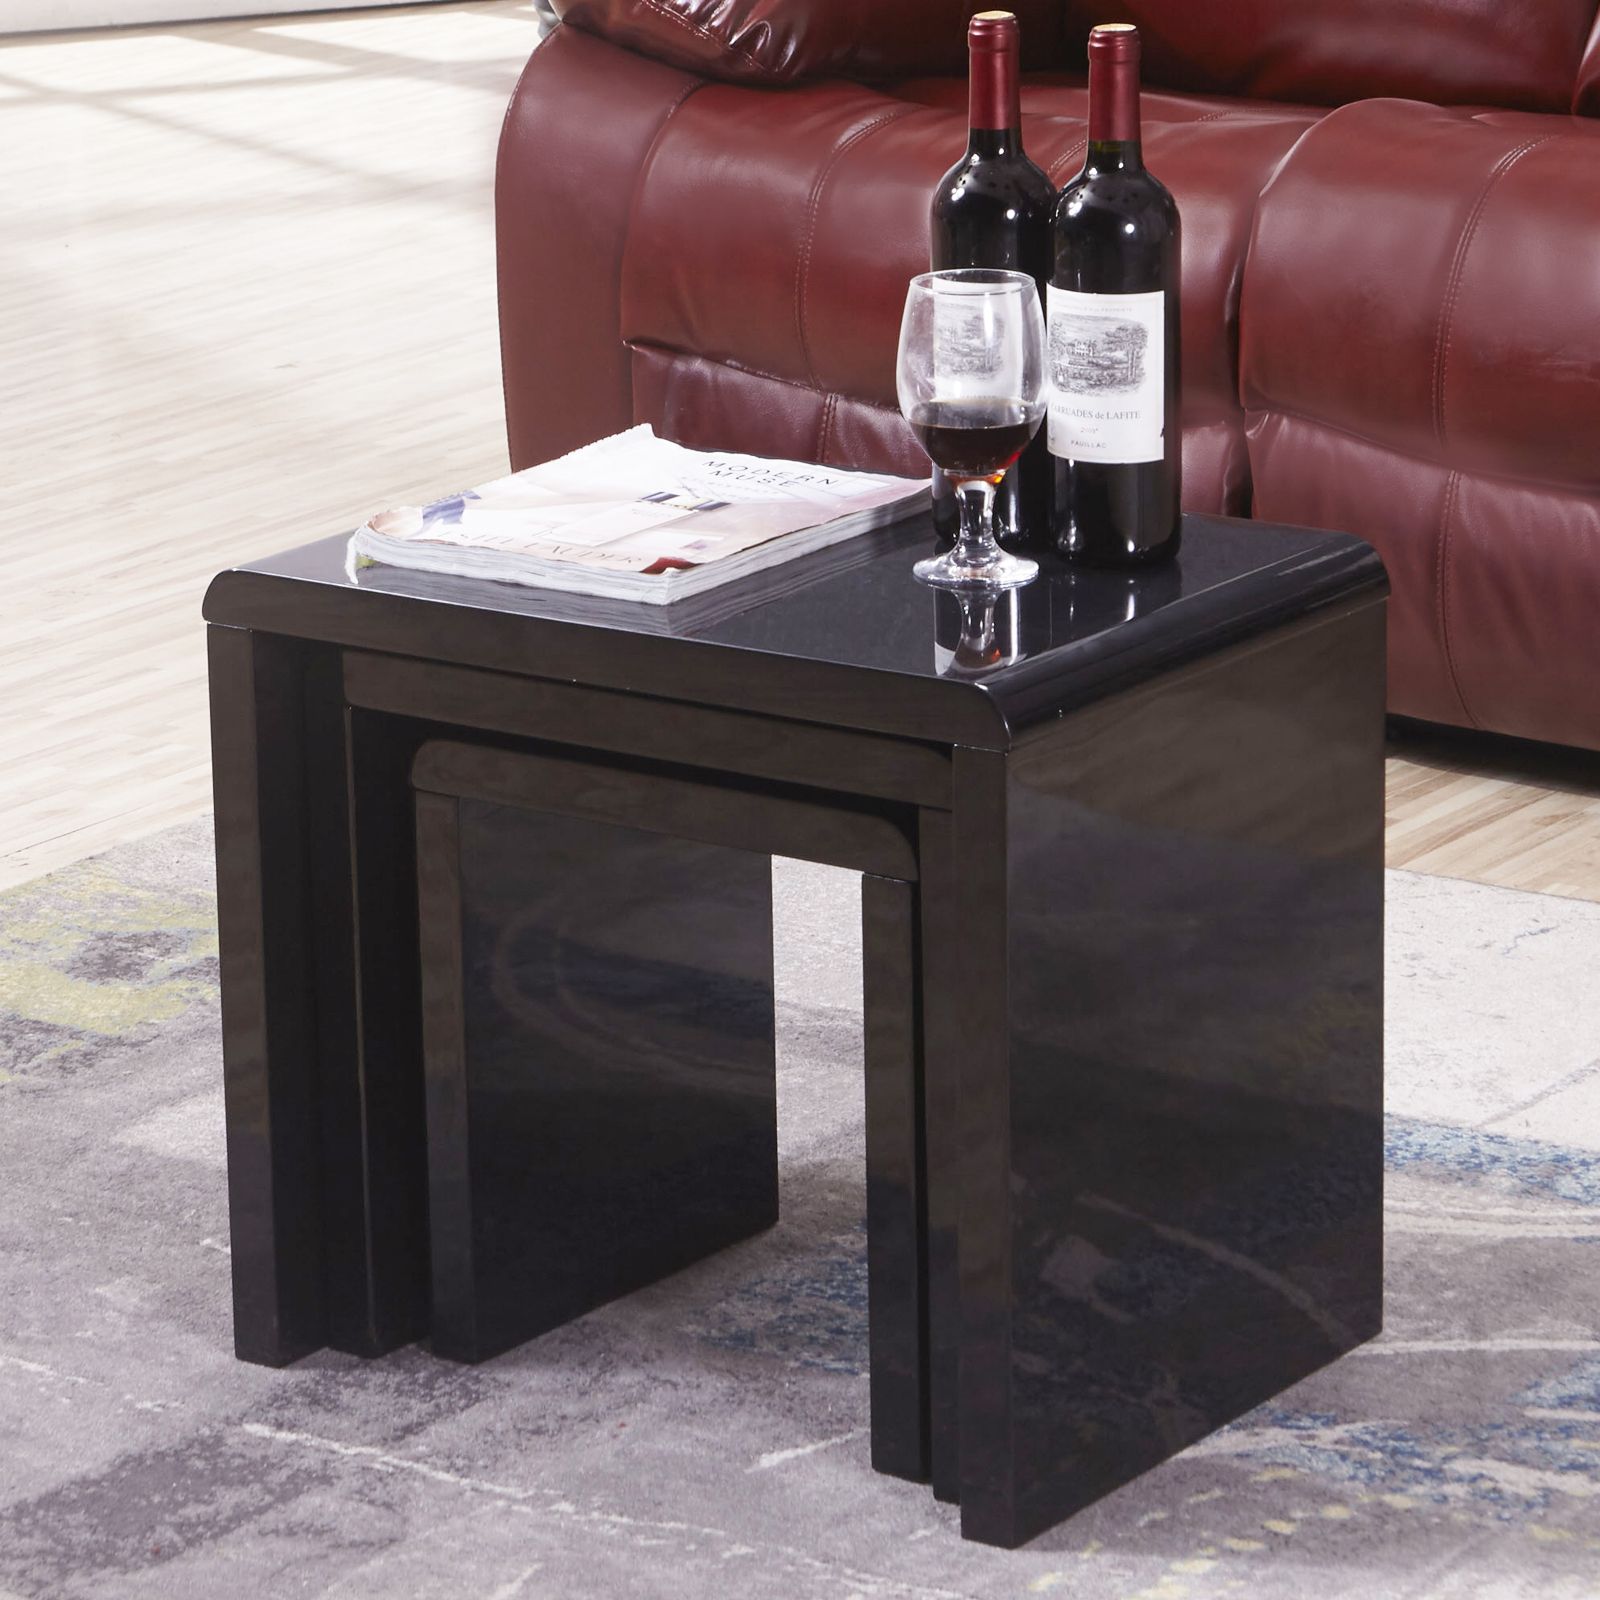 New Modern Design High Gloss Black Nest Of 3 Coffee Table/side Table With Regard To High Gloss Black Coffee Tables (View 18 of 20)